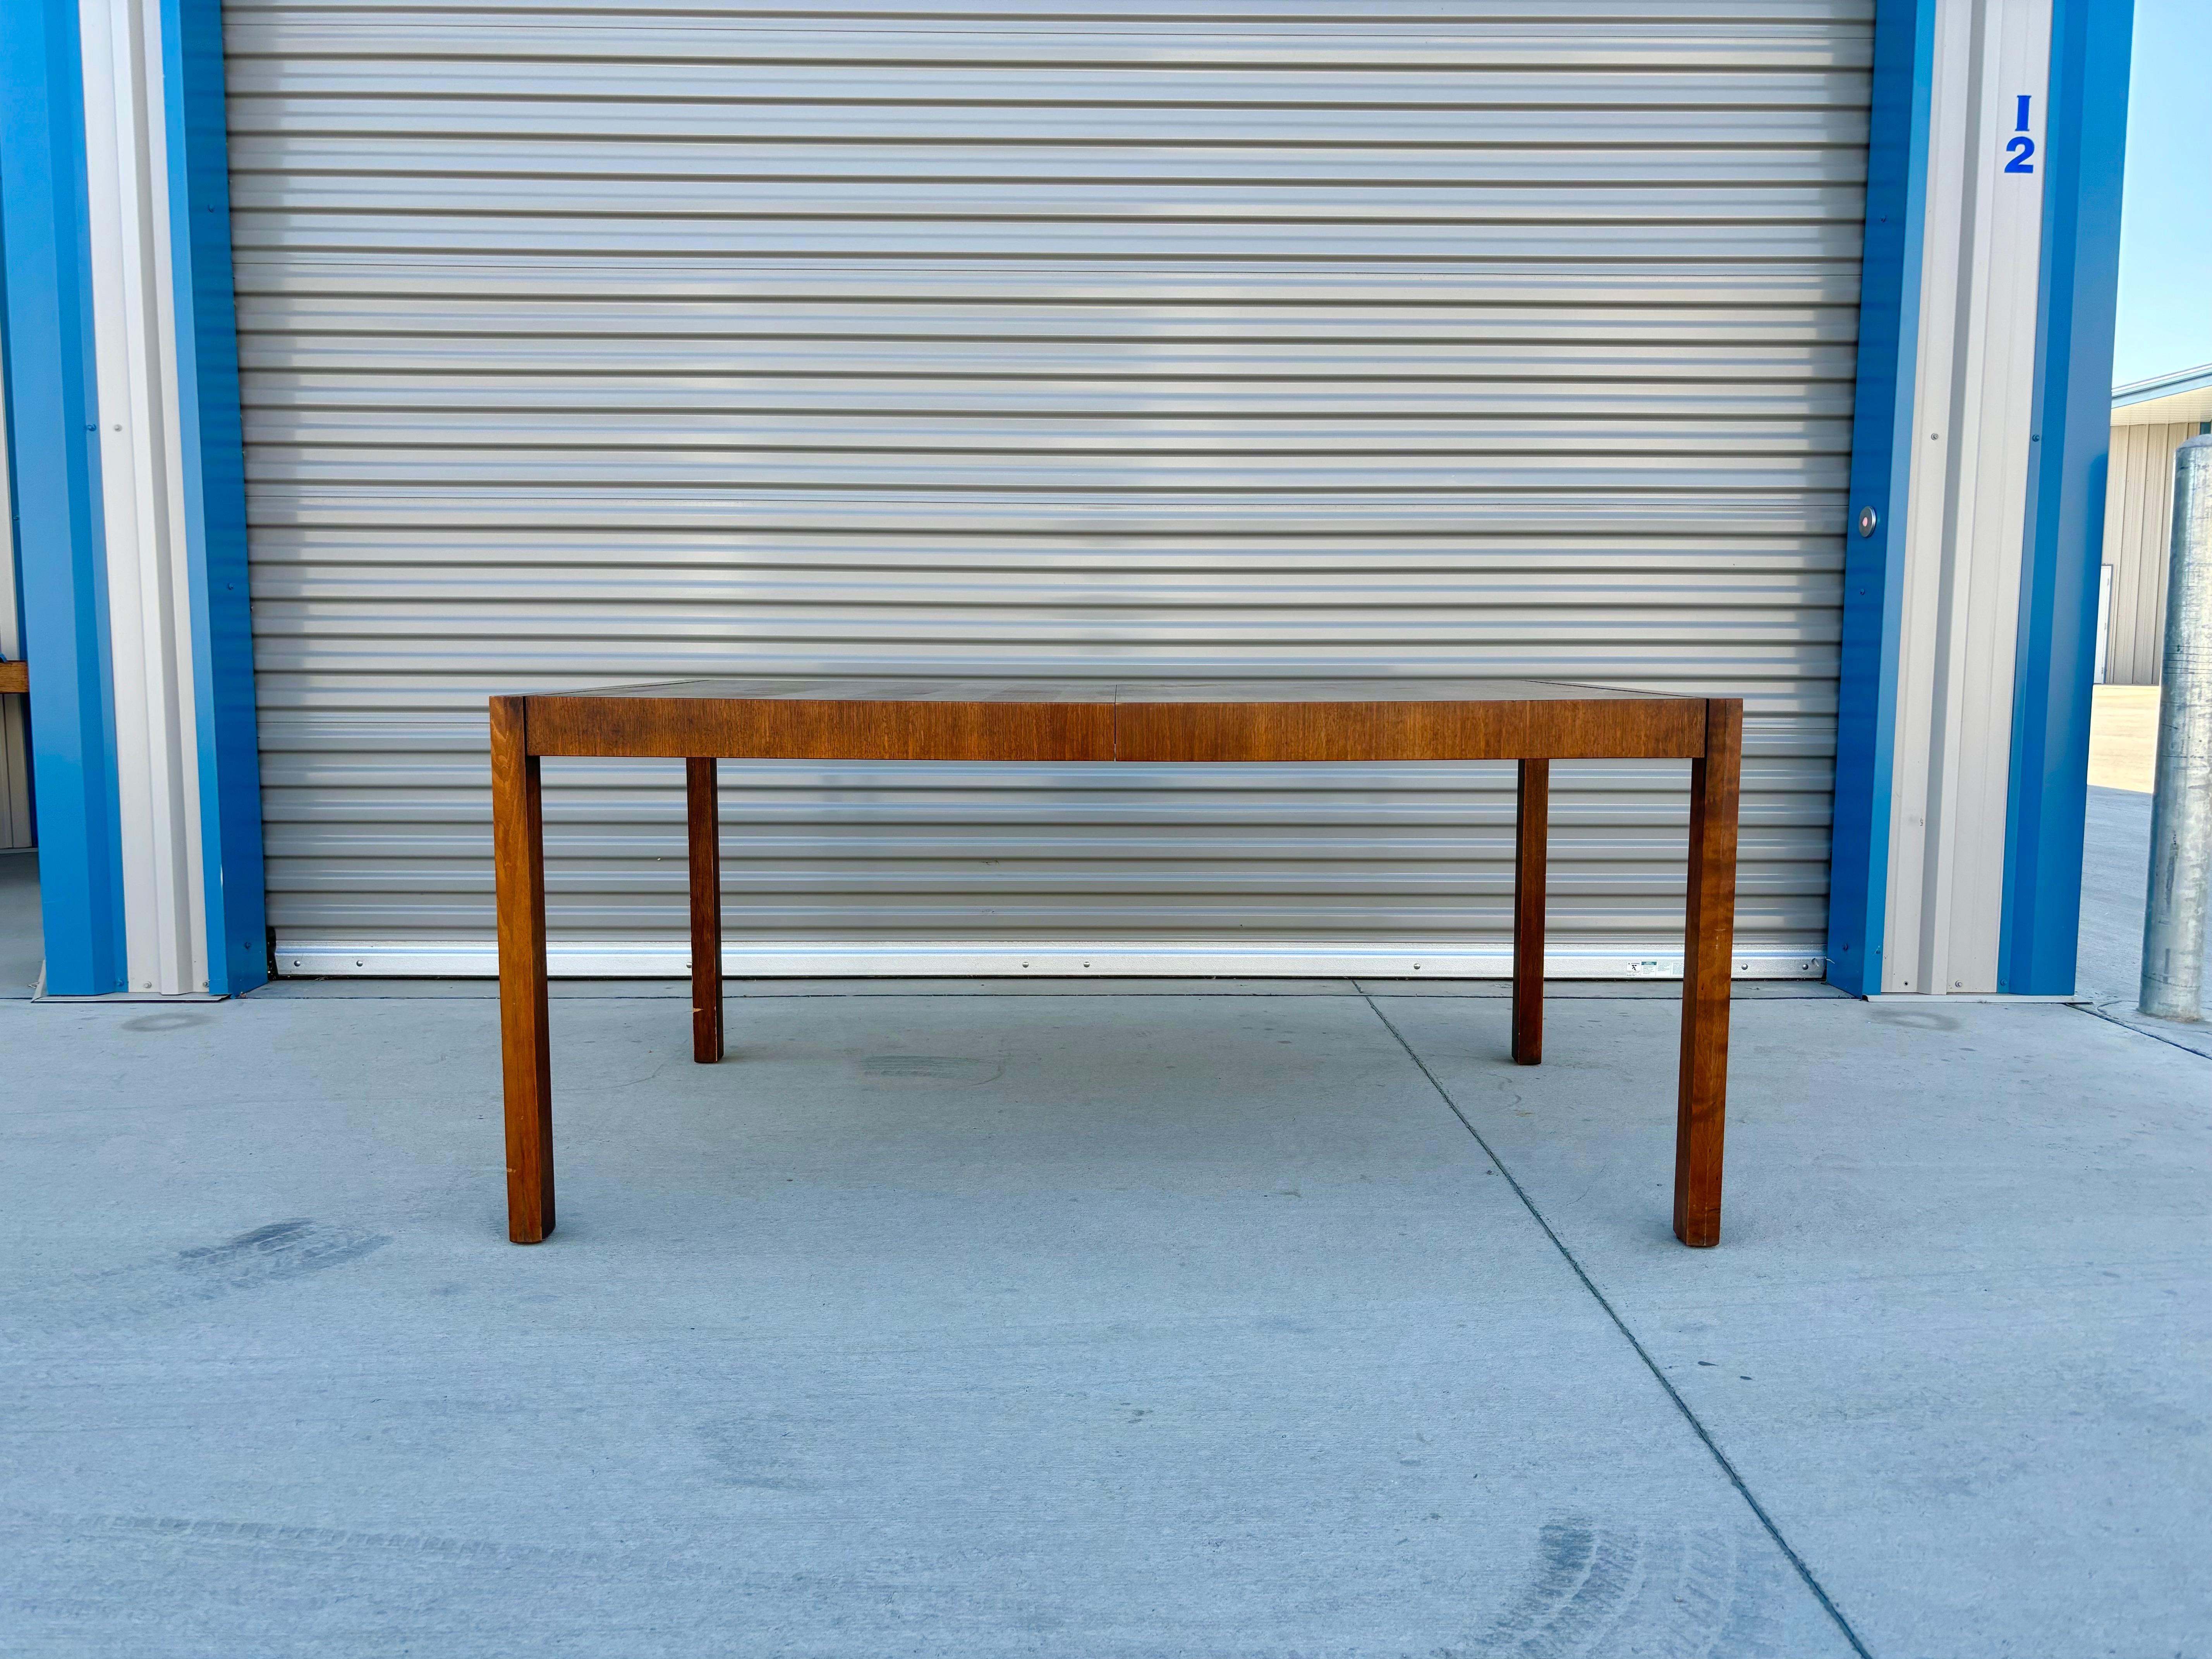 Mid-century dining table that was designed and manufactured in the United States circa 1950s. The table is made from a beautiful walnut frame and has two leaves that can be added to make the table longer. It's a true beauty and will surely add a